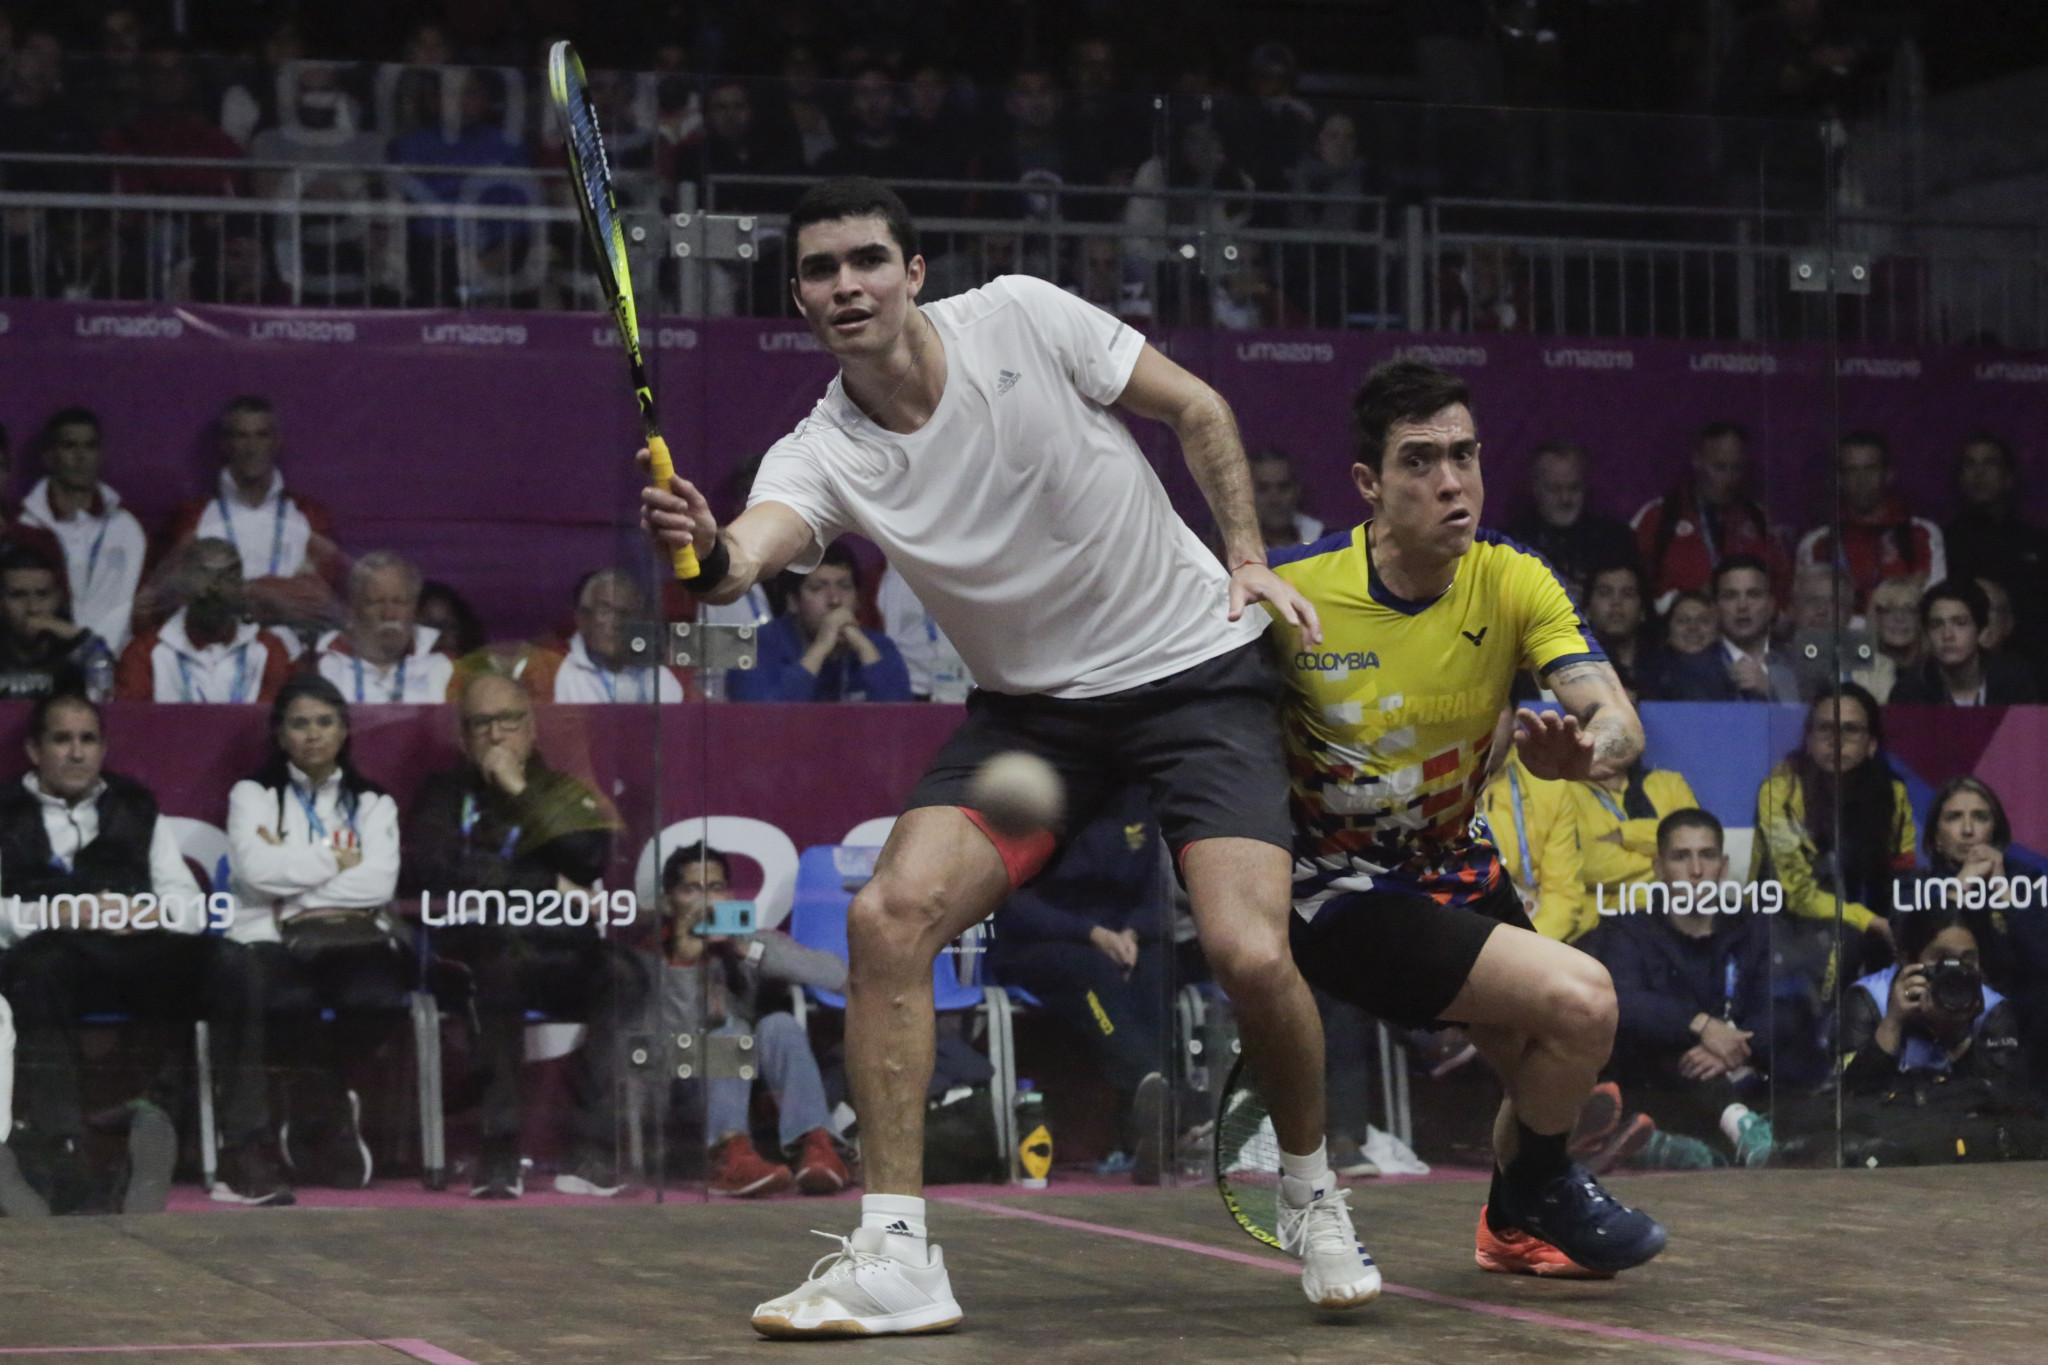 Diego Elias delighted the Peruvian crowd with a win in the men's squash final ©Lima 2019